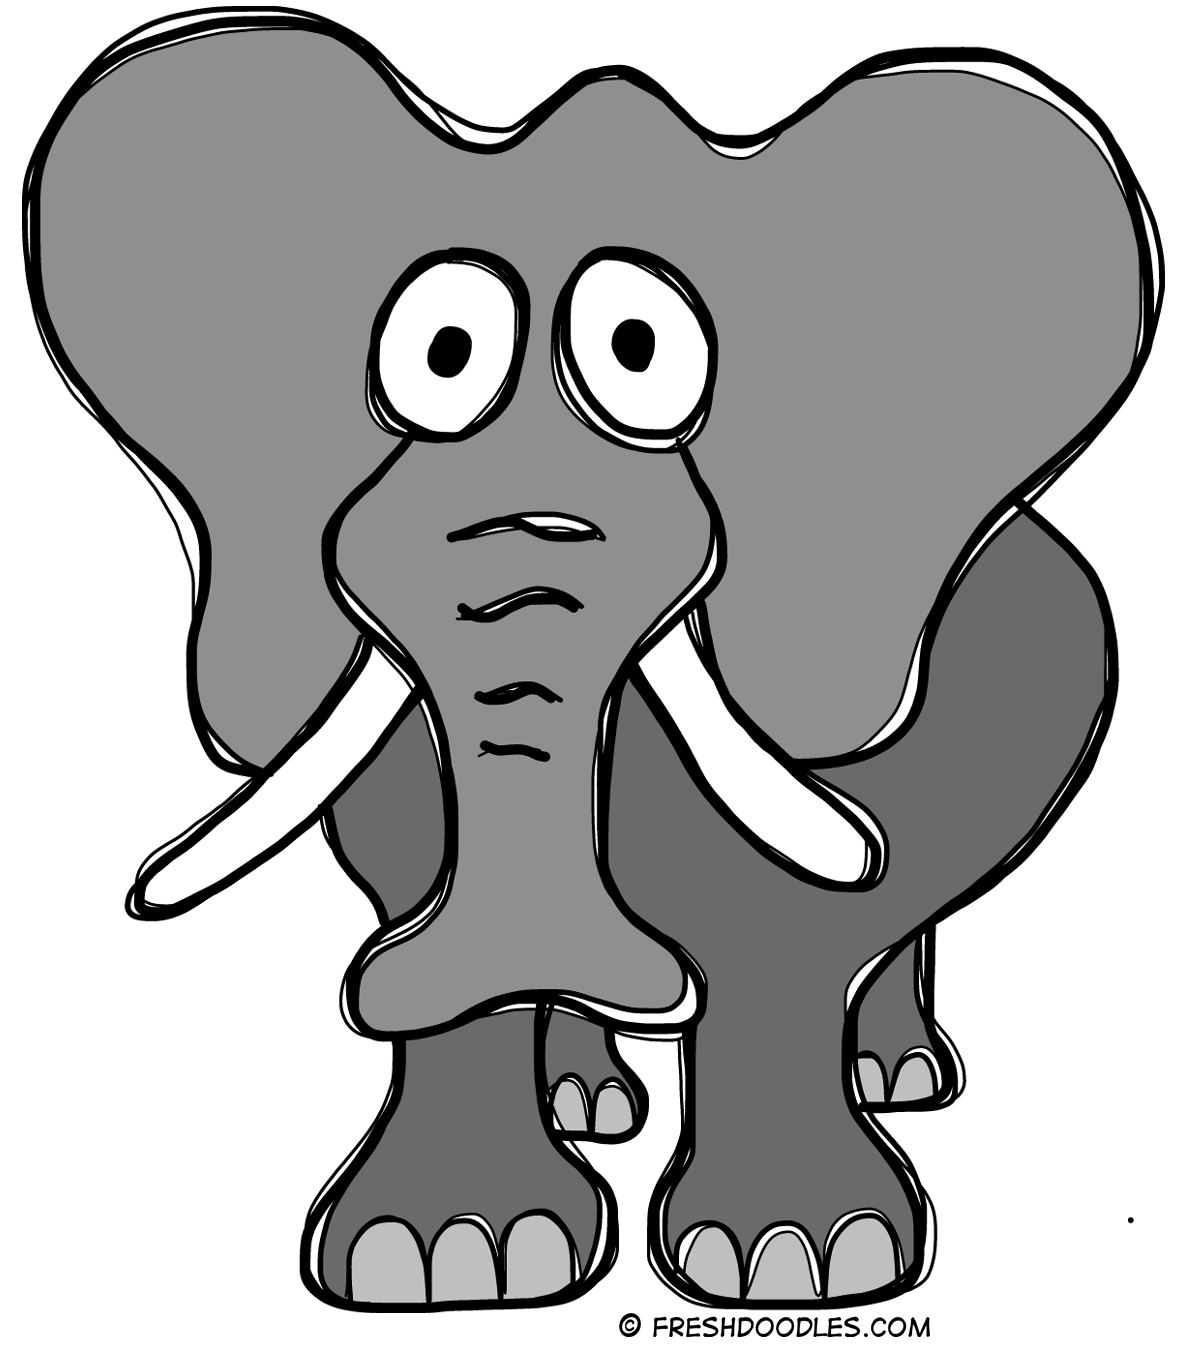 Elephant Image 3 Png Image Clipart